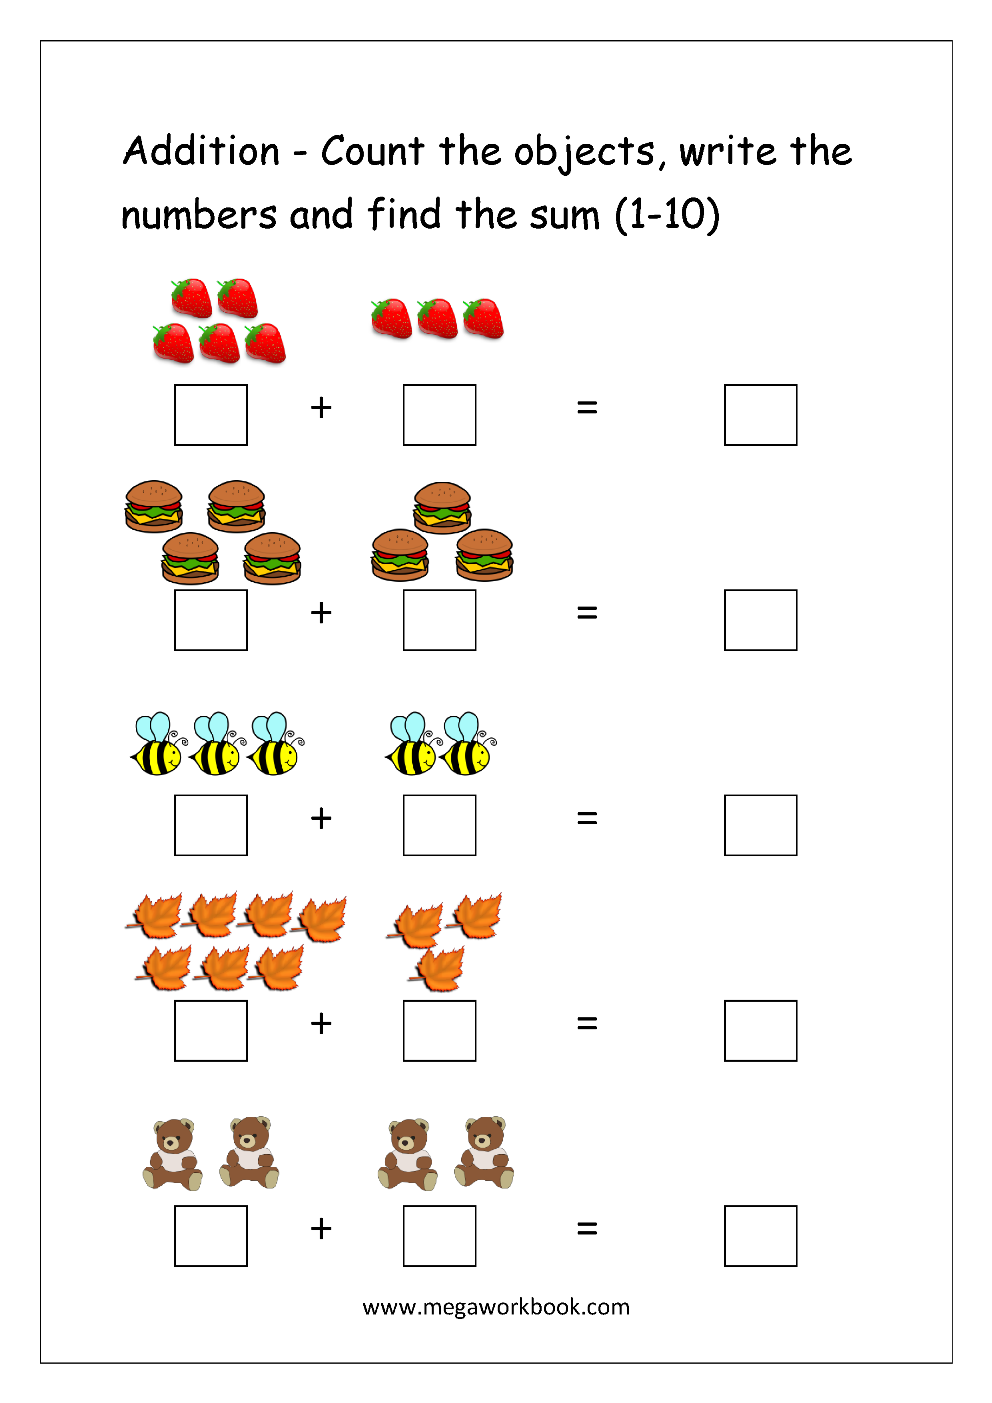 Numbers That Add Up To 10 Worksheet